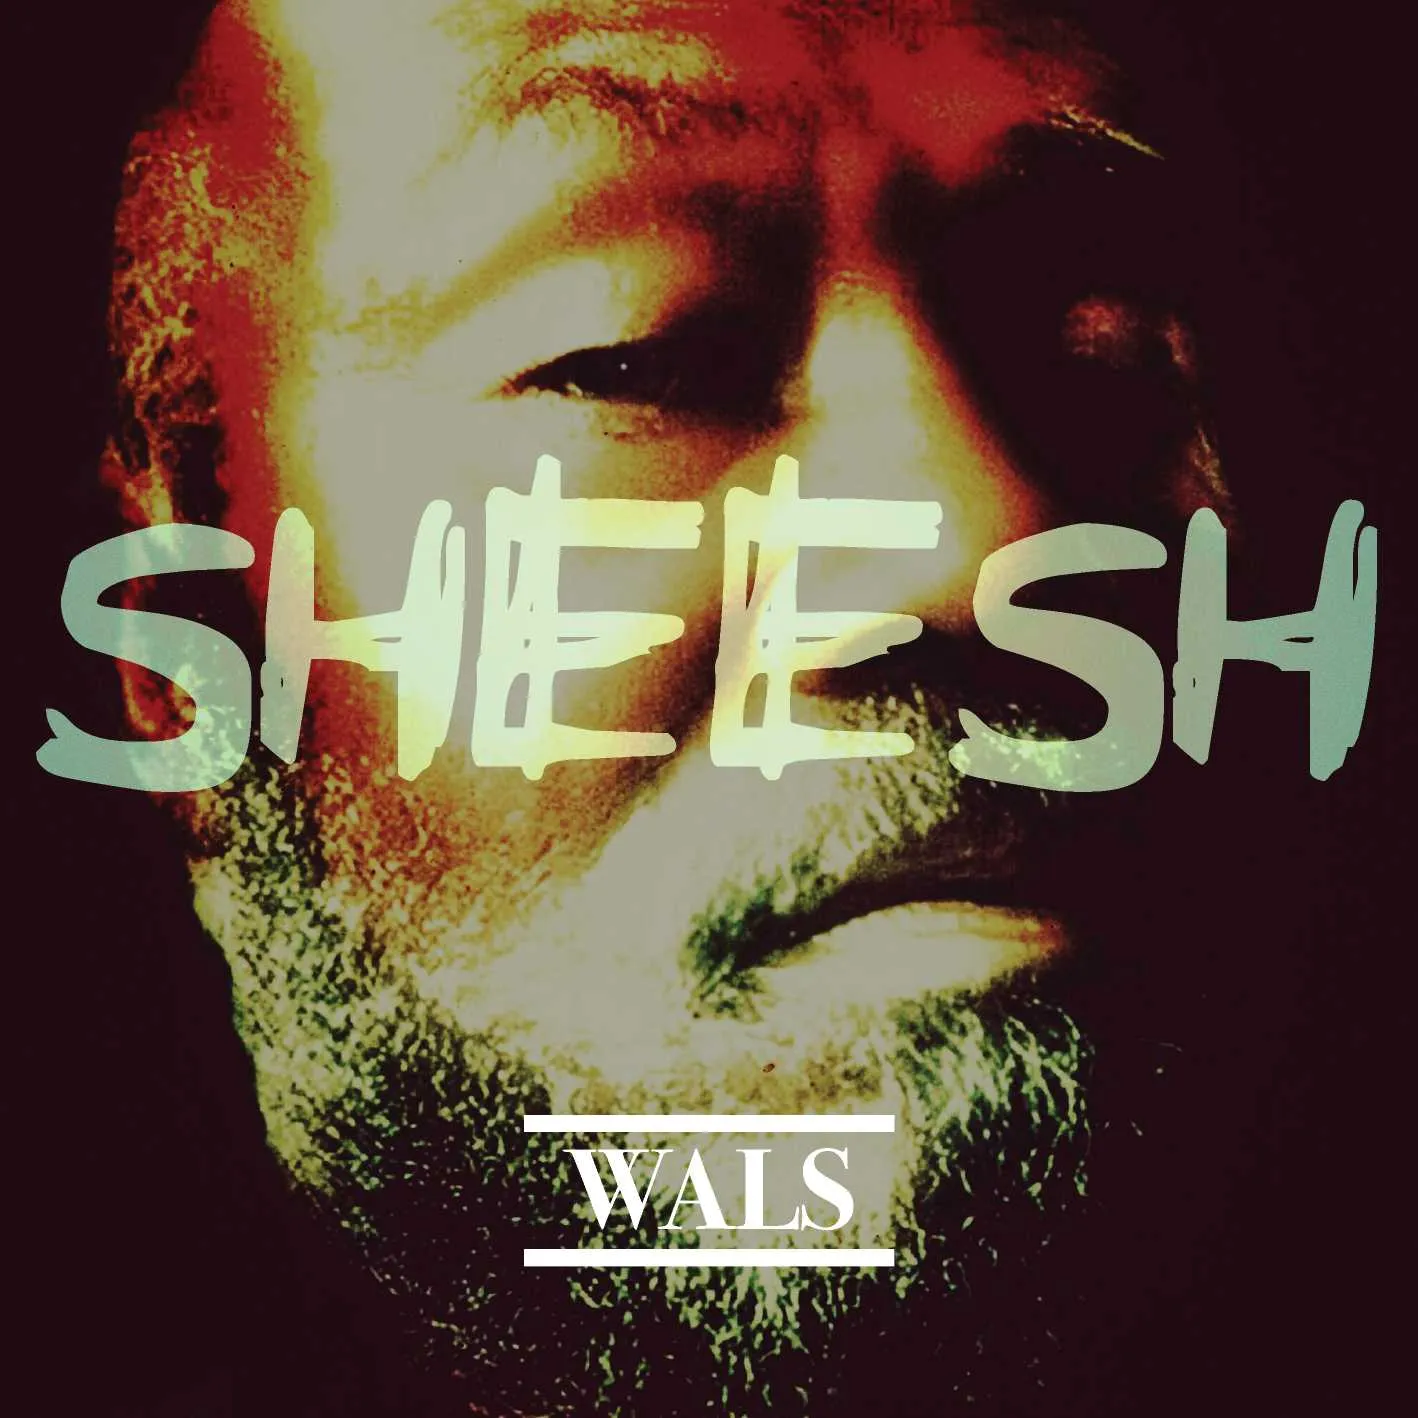 Album cover for “SHEESH” by Wals